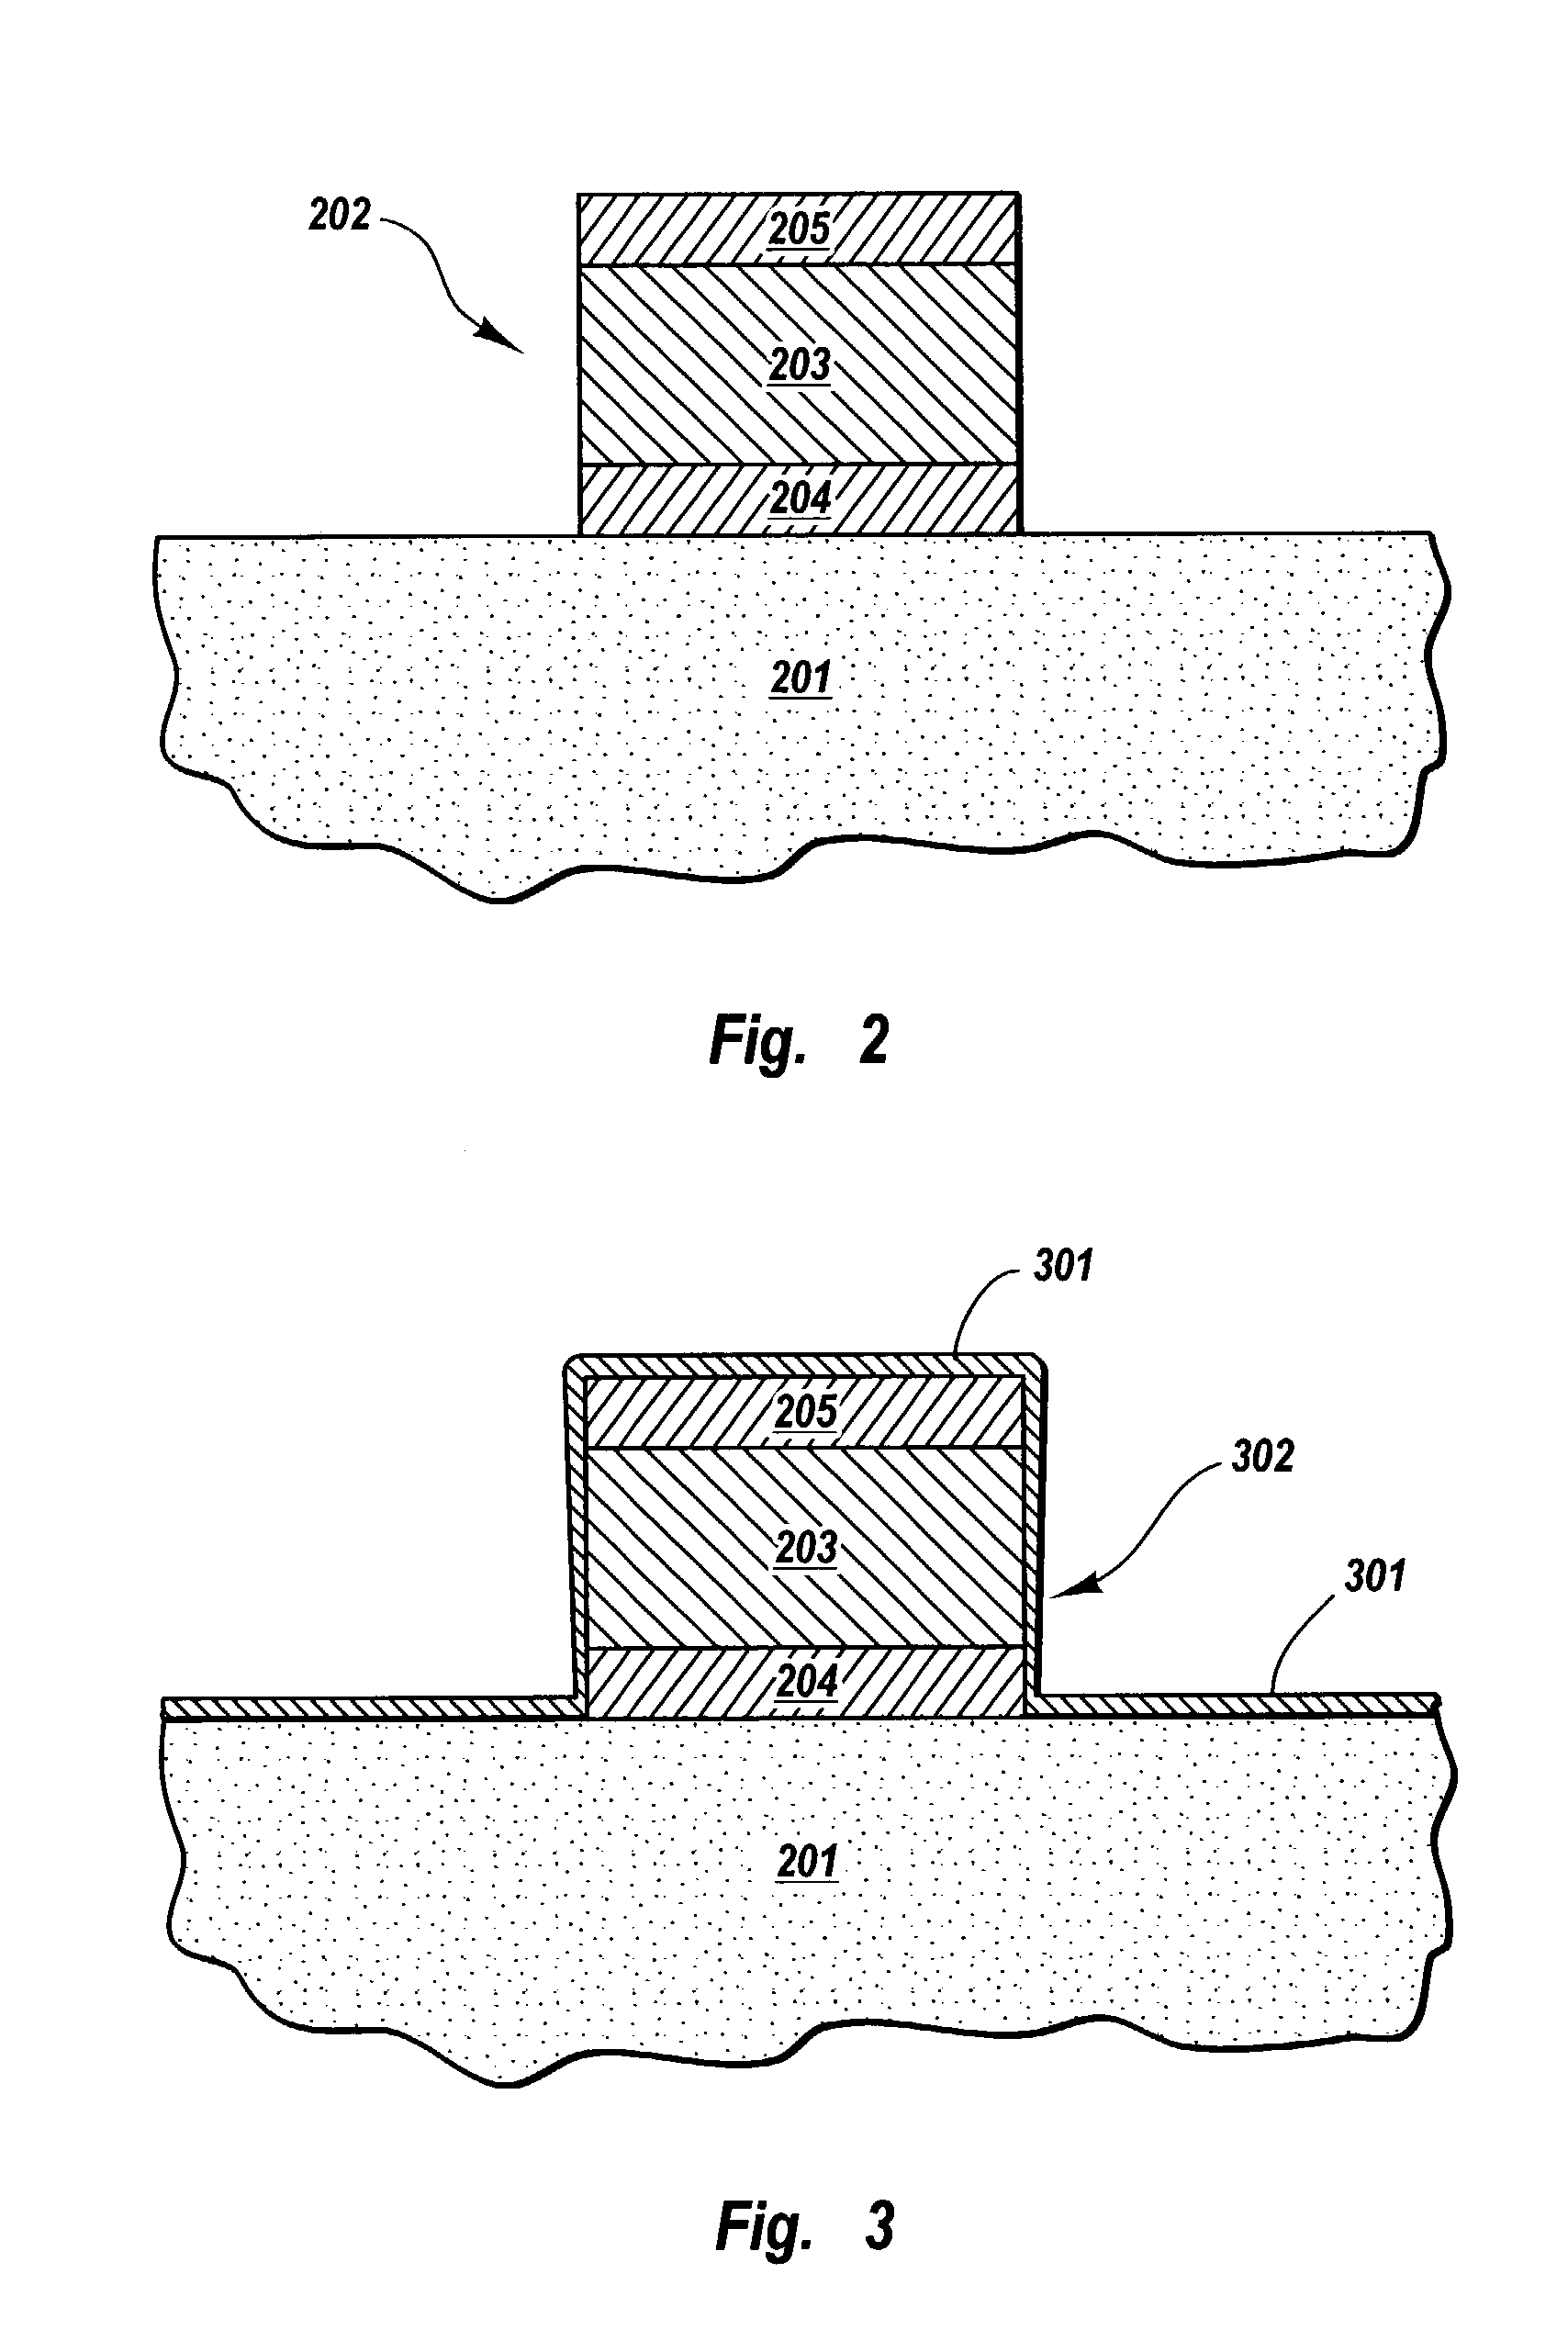 Methods for sidewall protection of metal interconnect for unlanded vias using physical vapor deposition